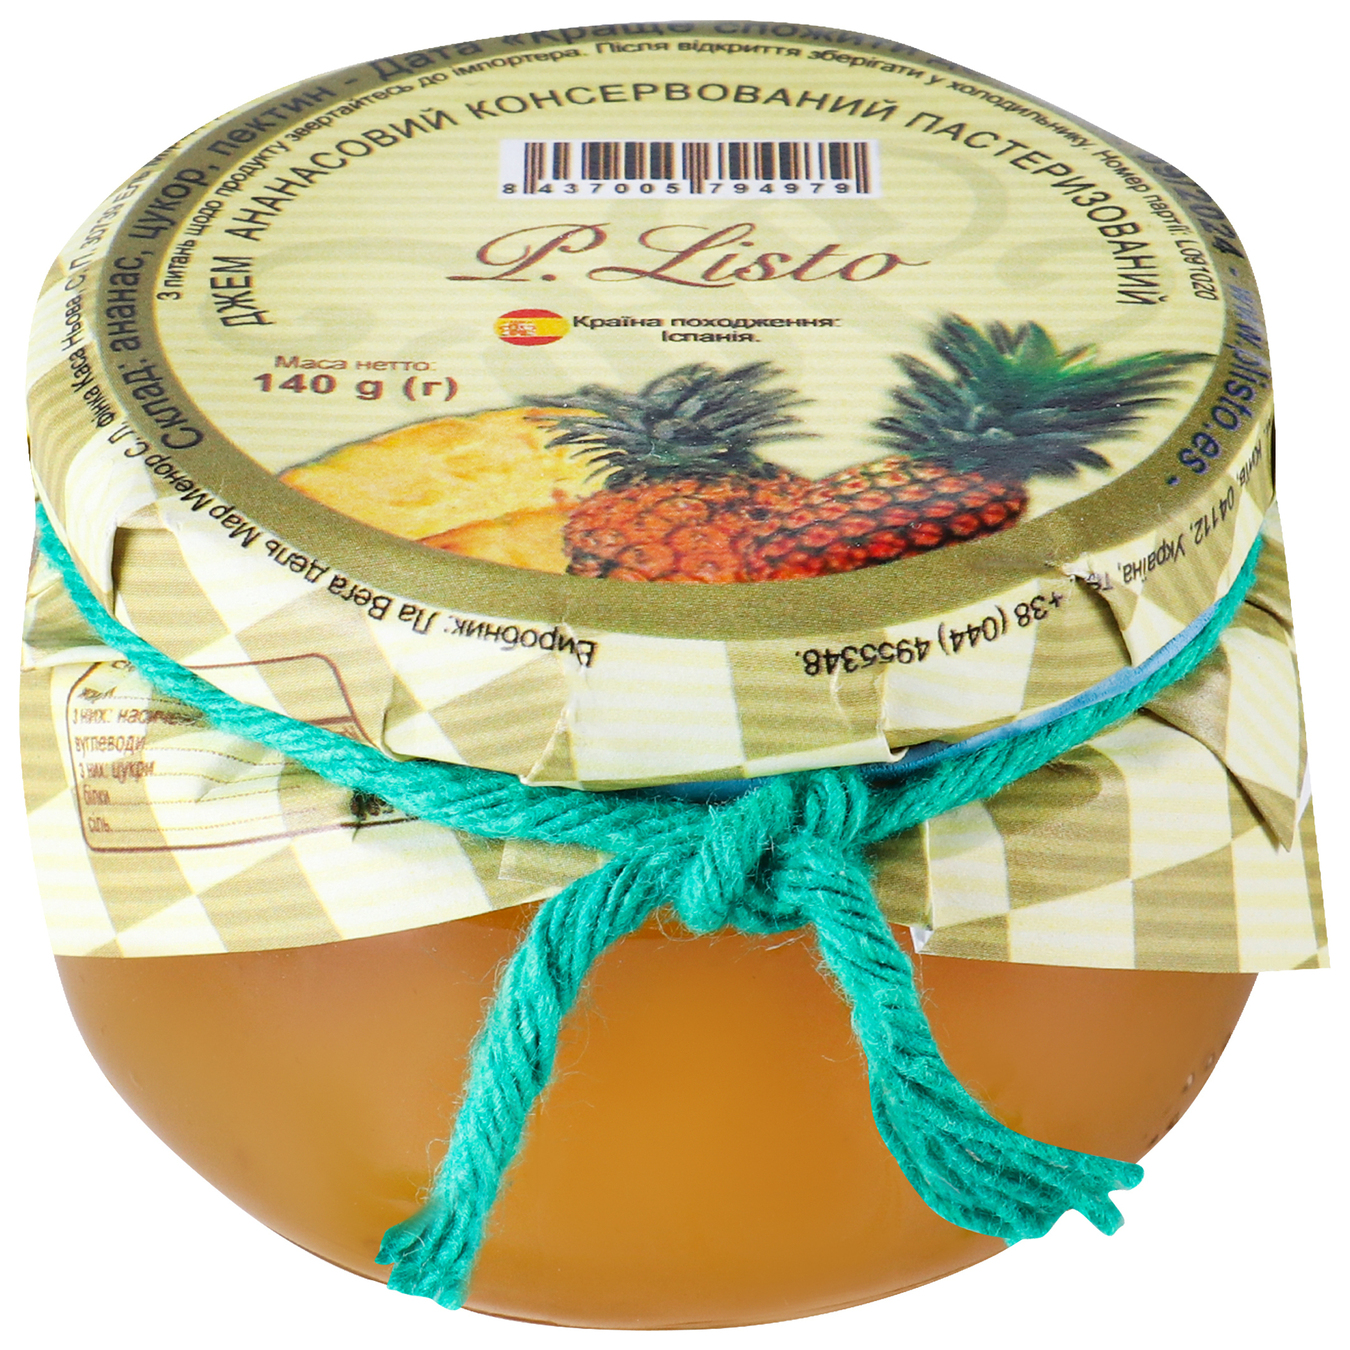 Jam P.Listo canned pineapple pasteurized 140g 2